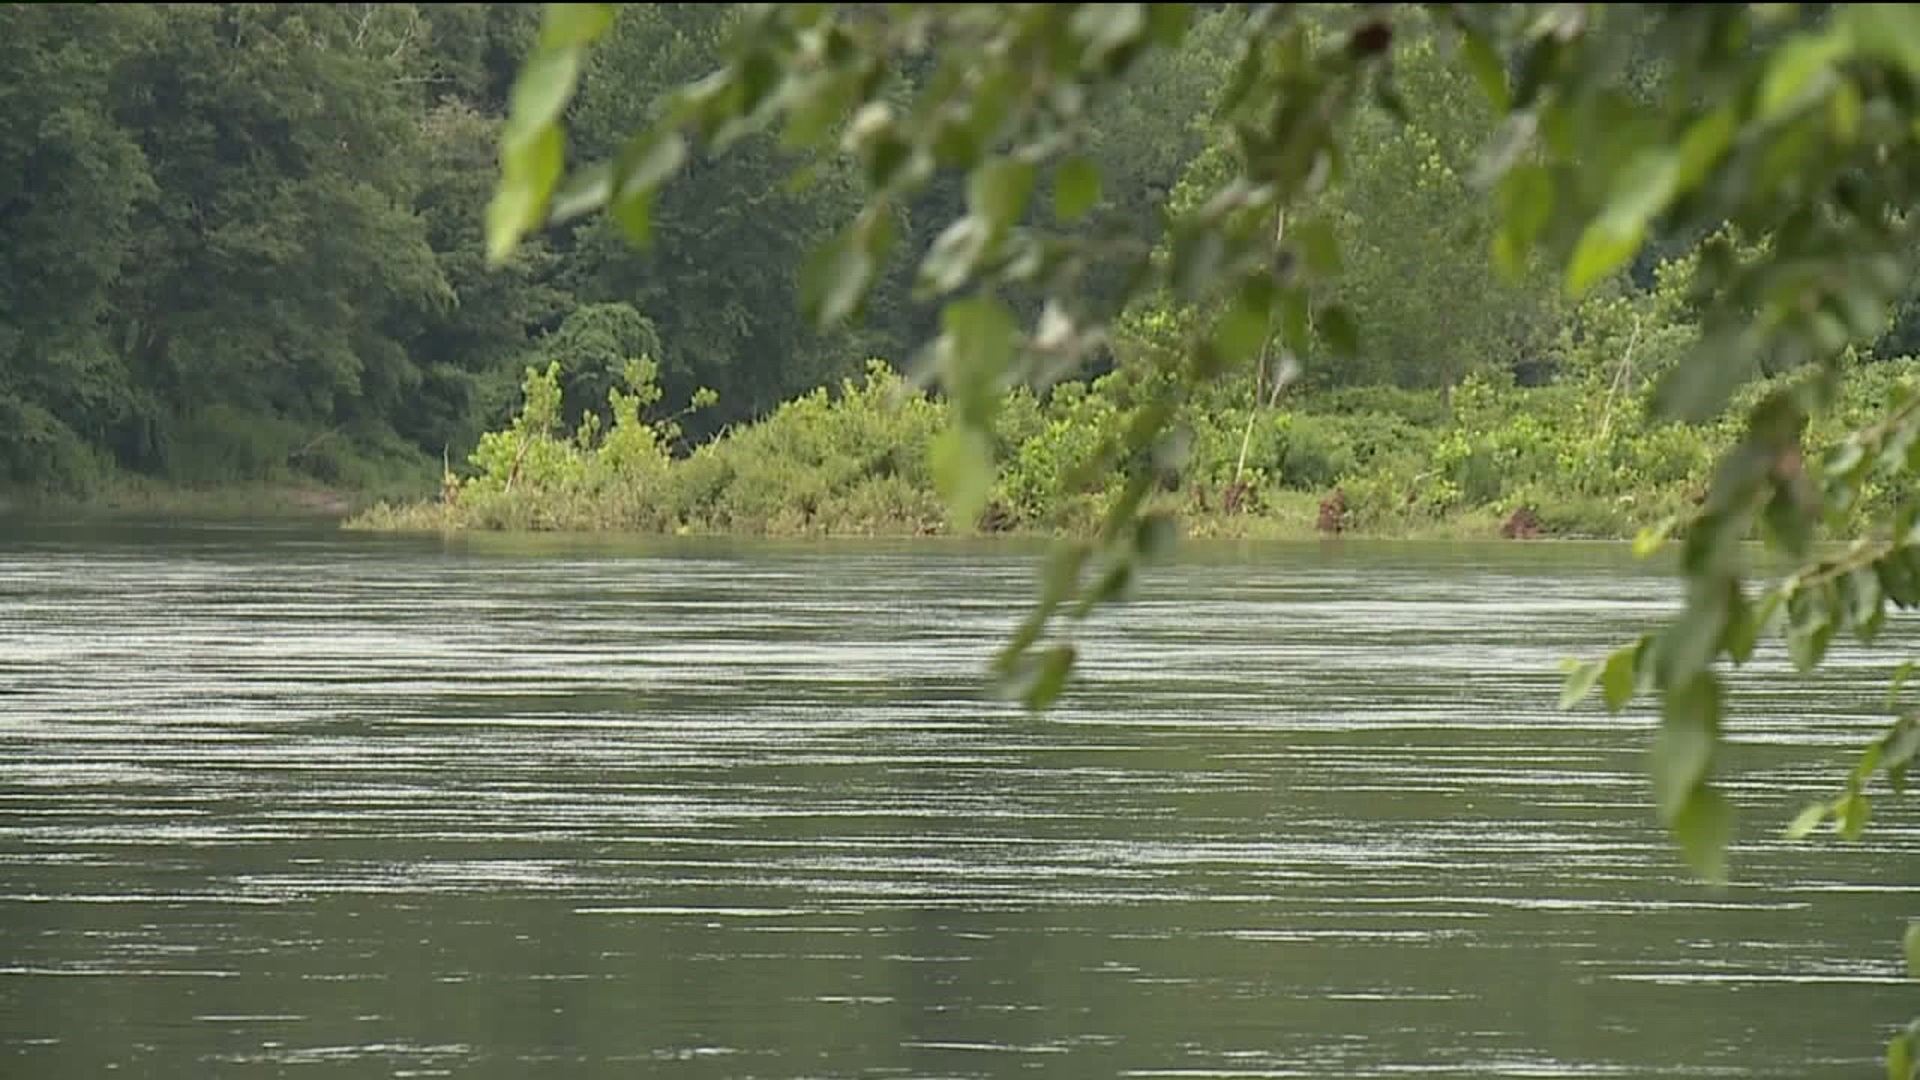 Swimming Banned in Delaware River Due to High River Levels